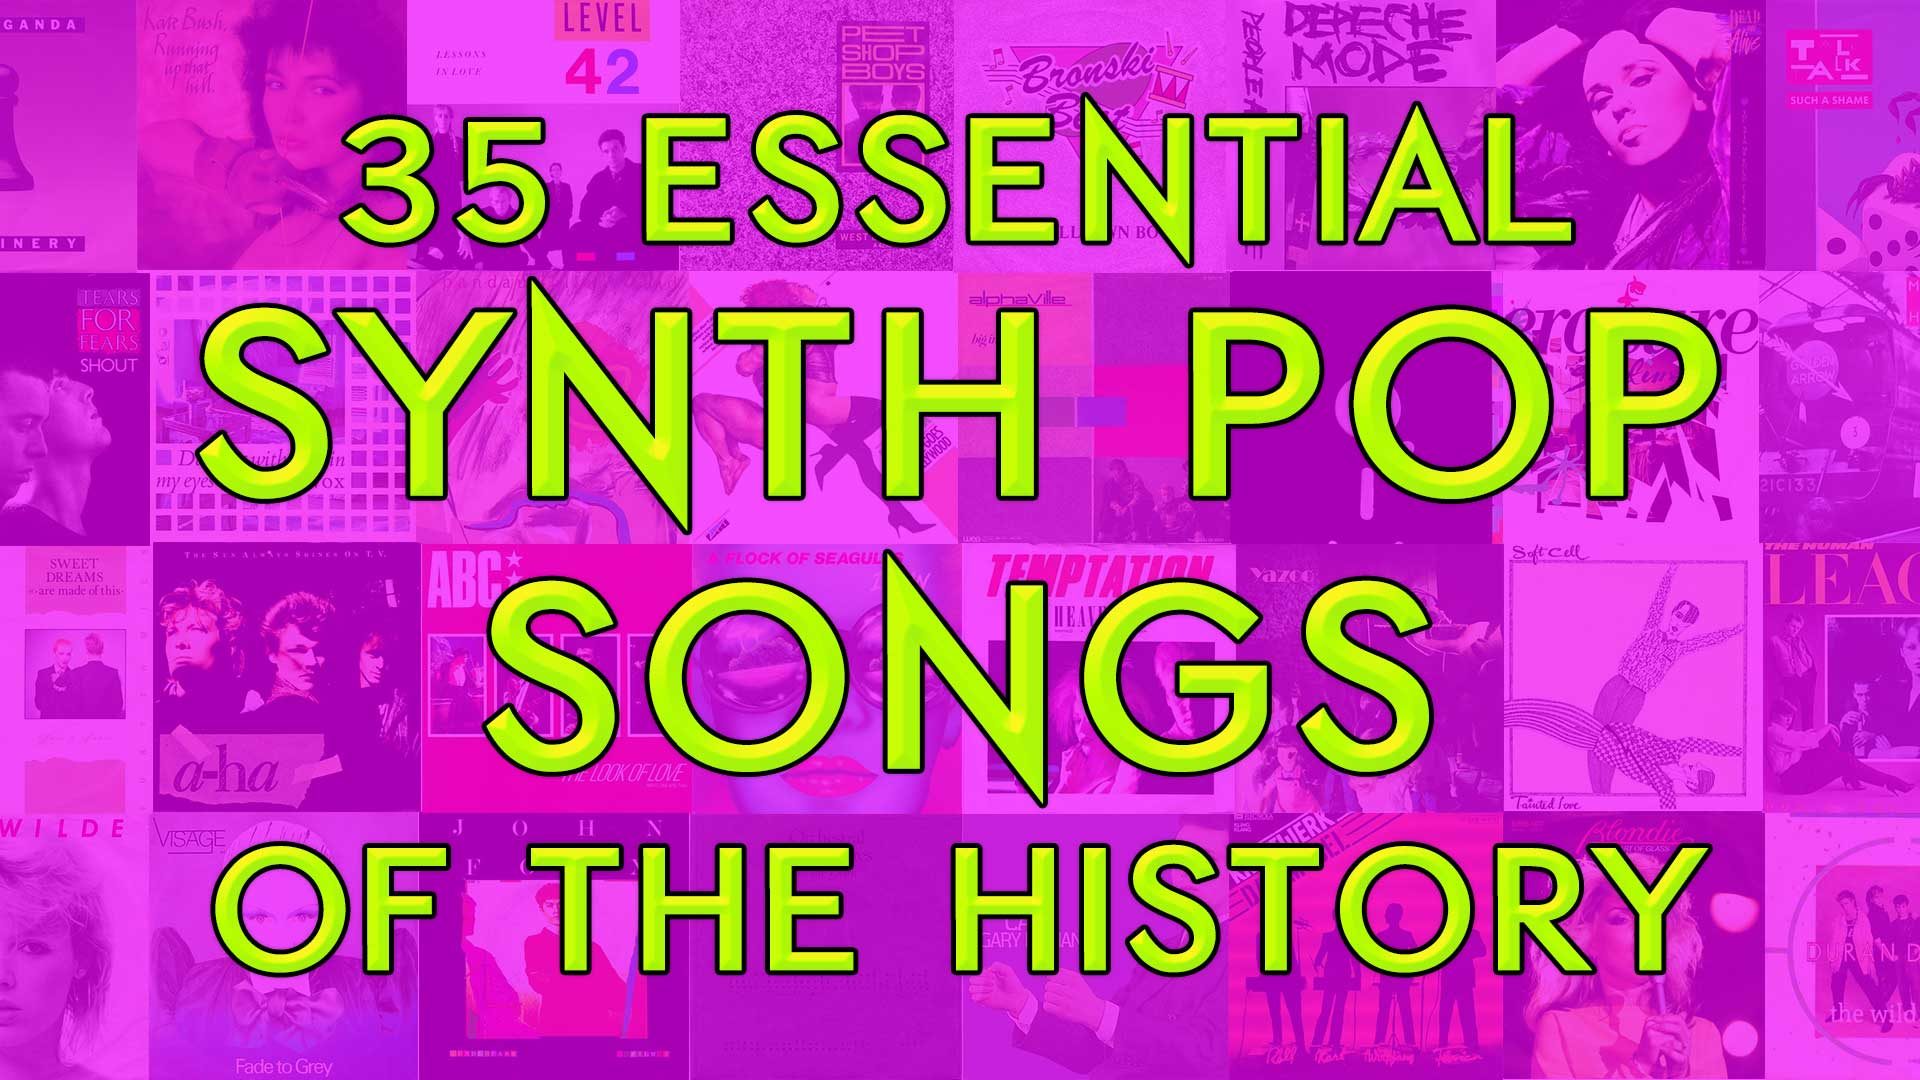 35 essential Synth Pop songs of the history